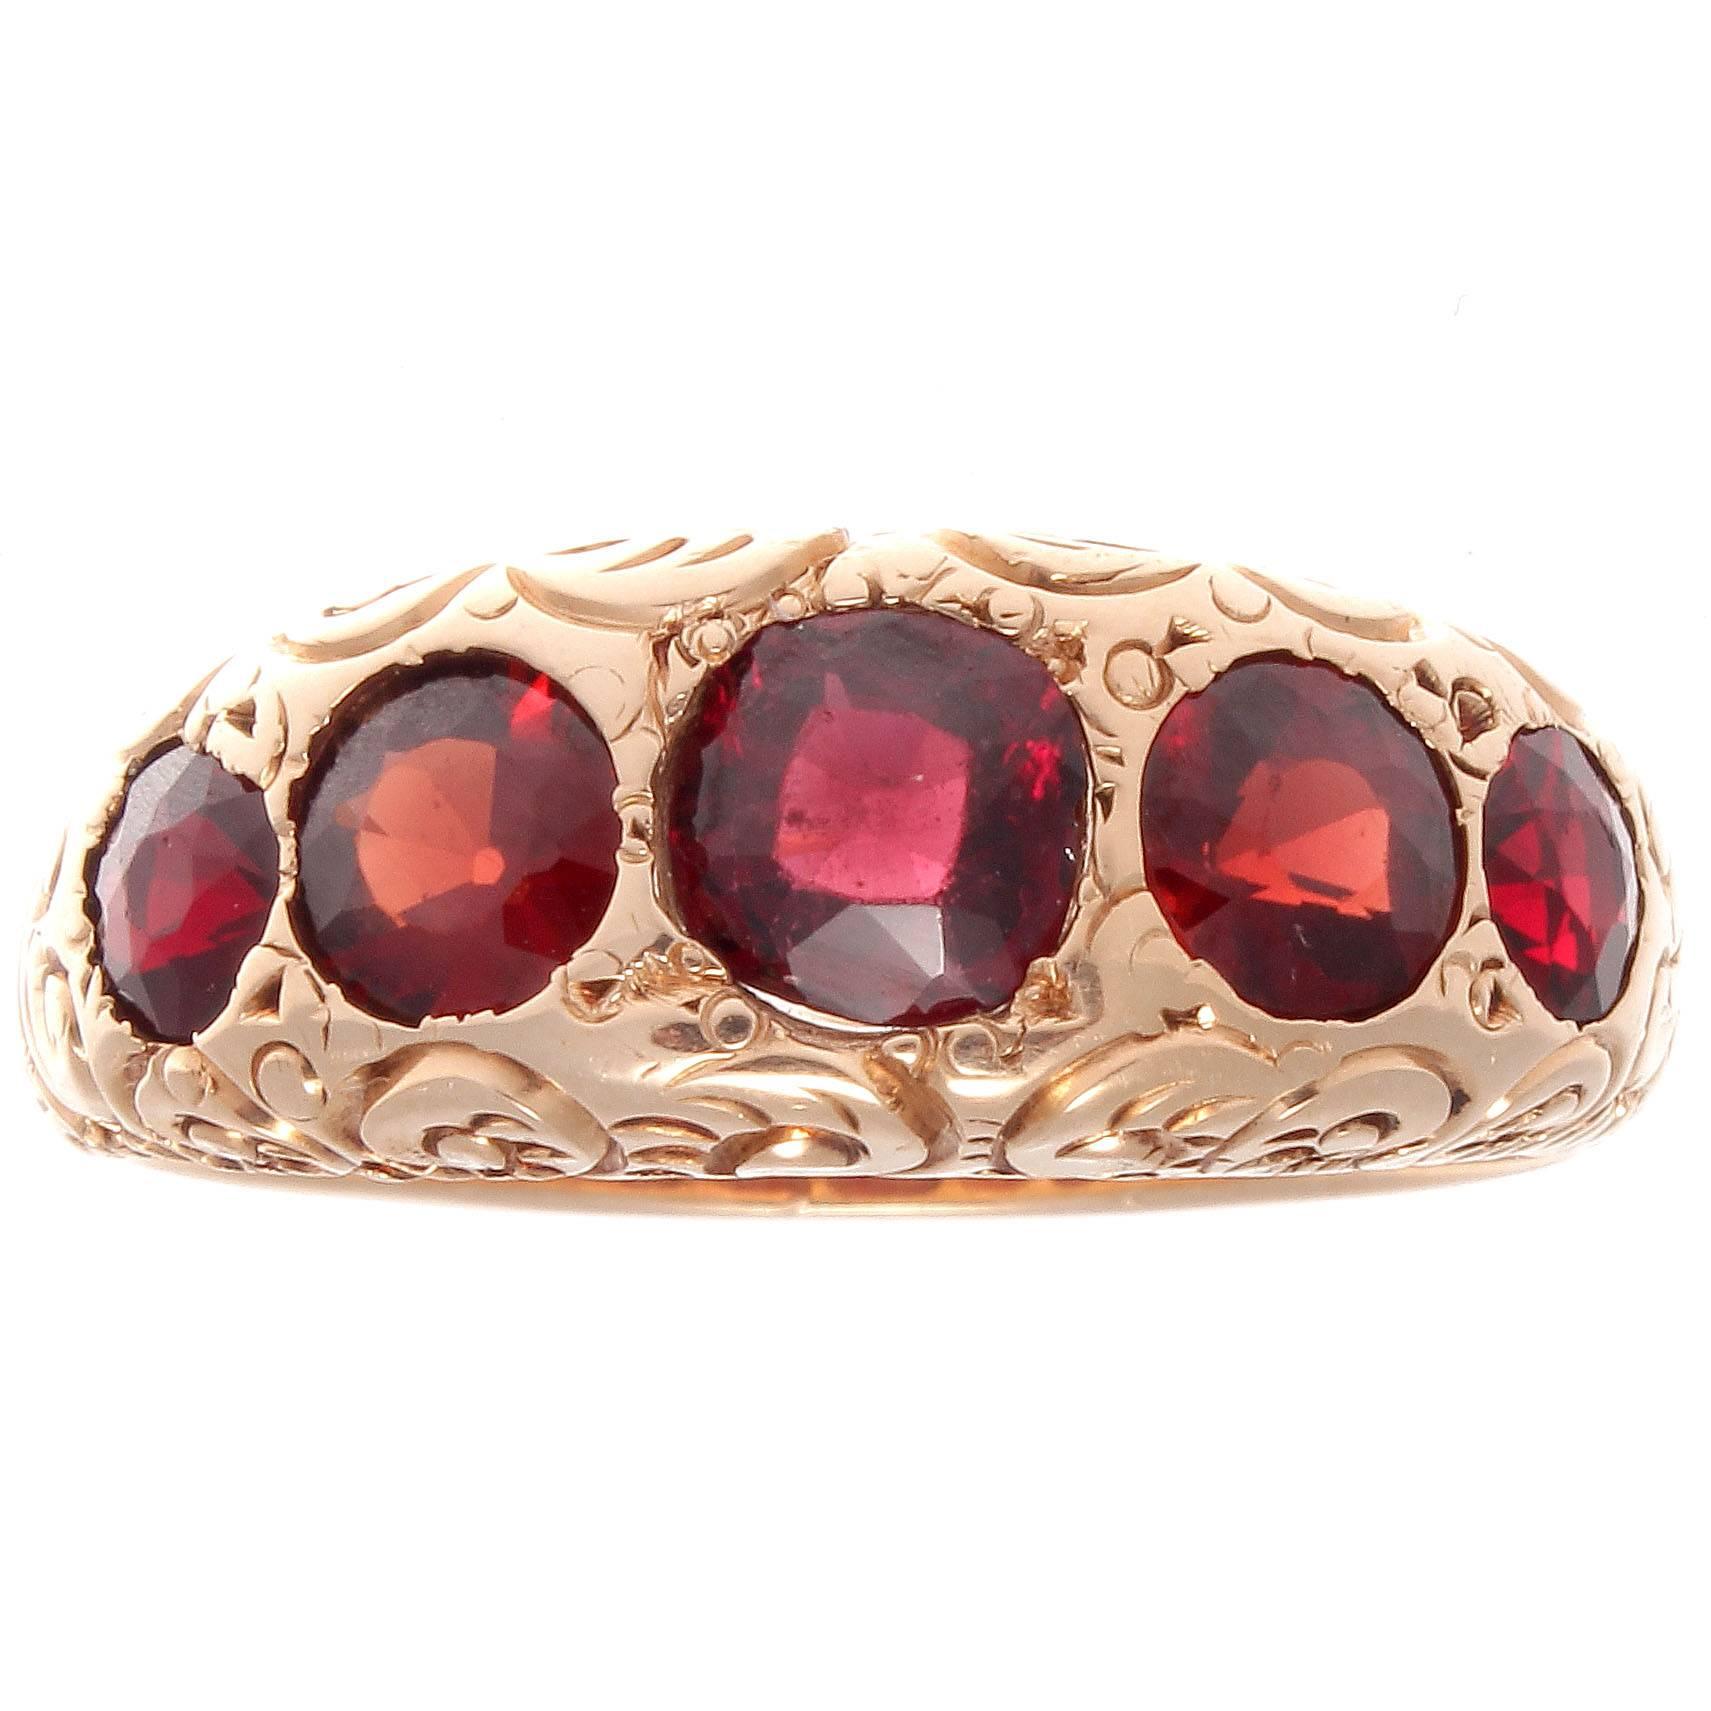 A great representation of Victorian beauty.  A classic 19th century combination of 5 orange-red garnets set in an expertly filigreed 14k gold ring. 

Ring size 8-1/2 and can easily be resized, if needed this would come complimentary with your